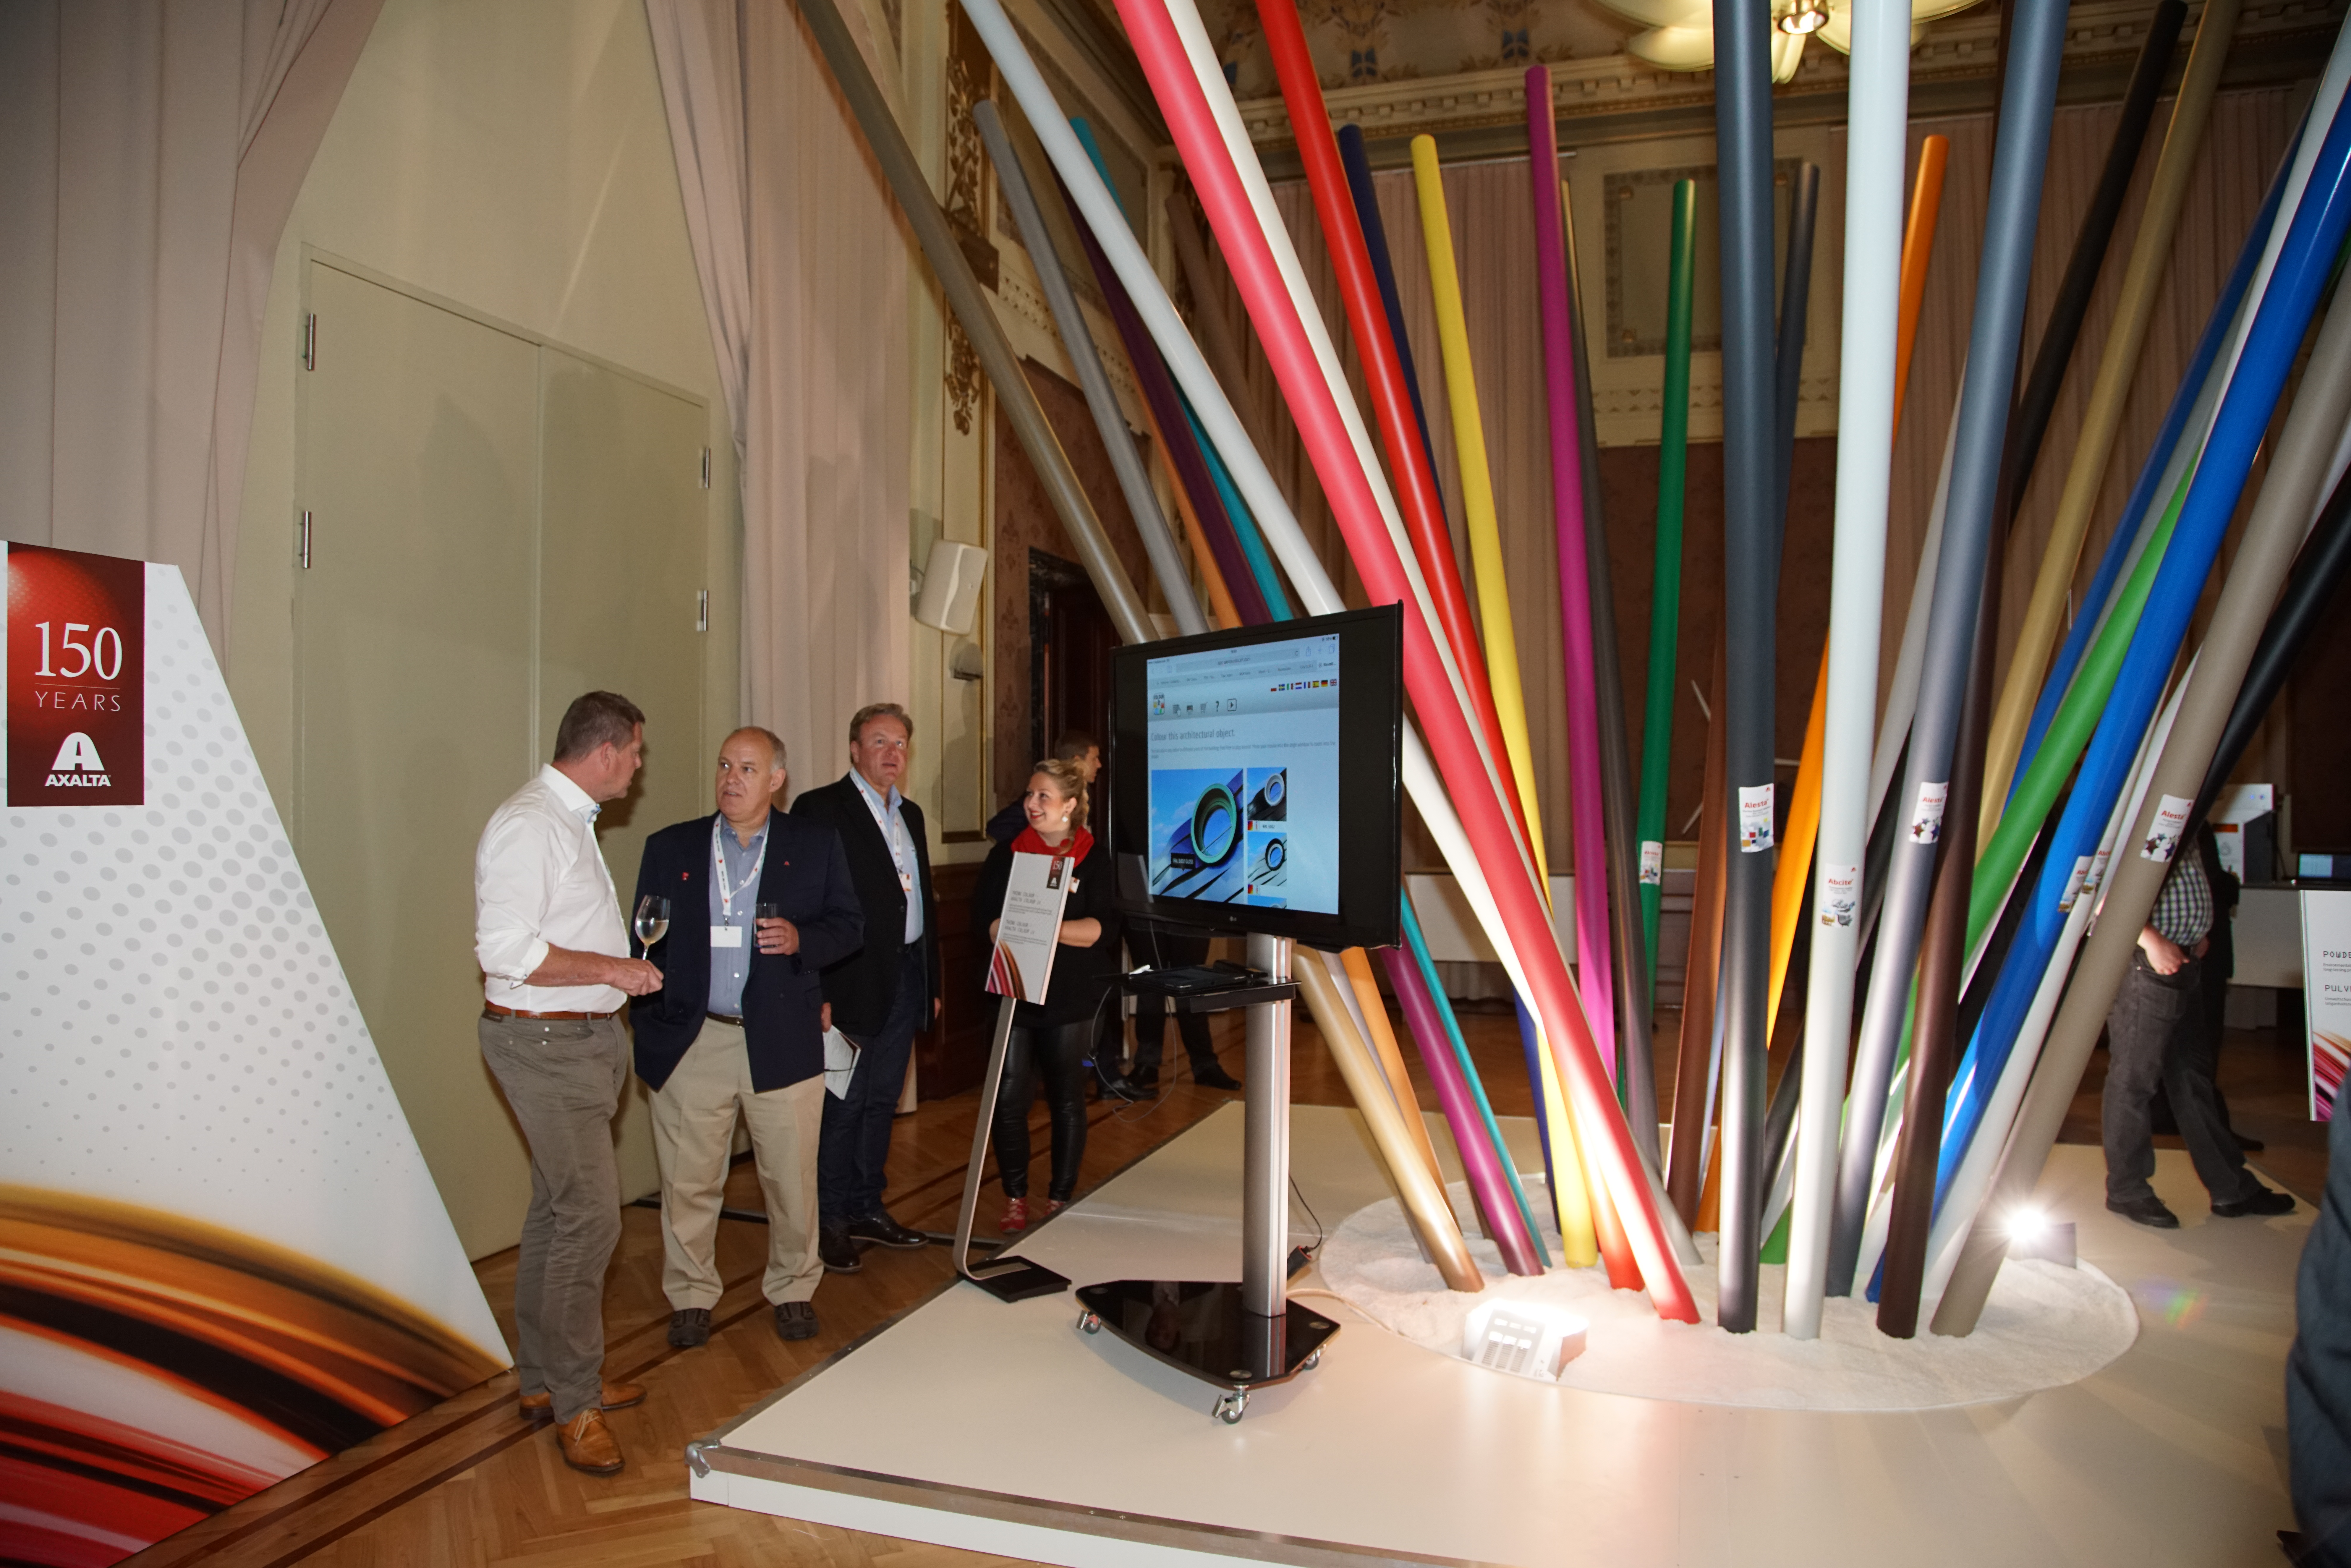 In Europe, customers participated in a day-long Experienced for the Future symposium including a product exhibition